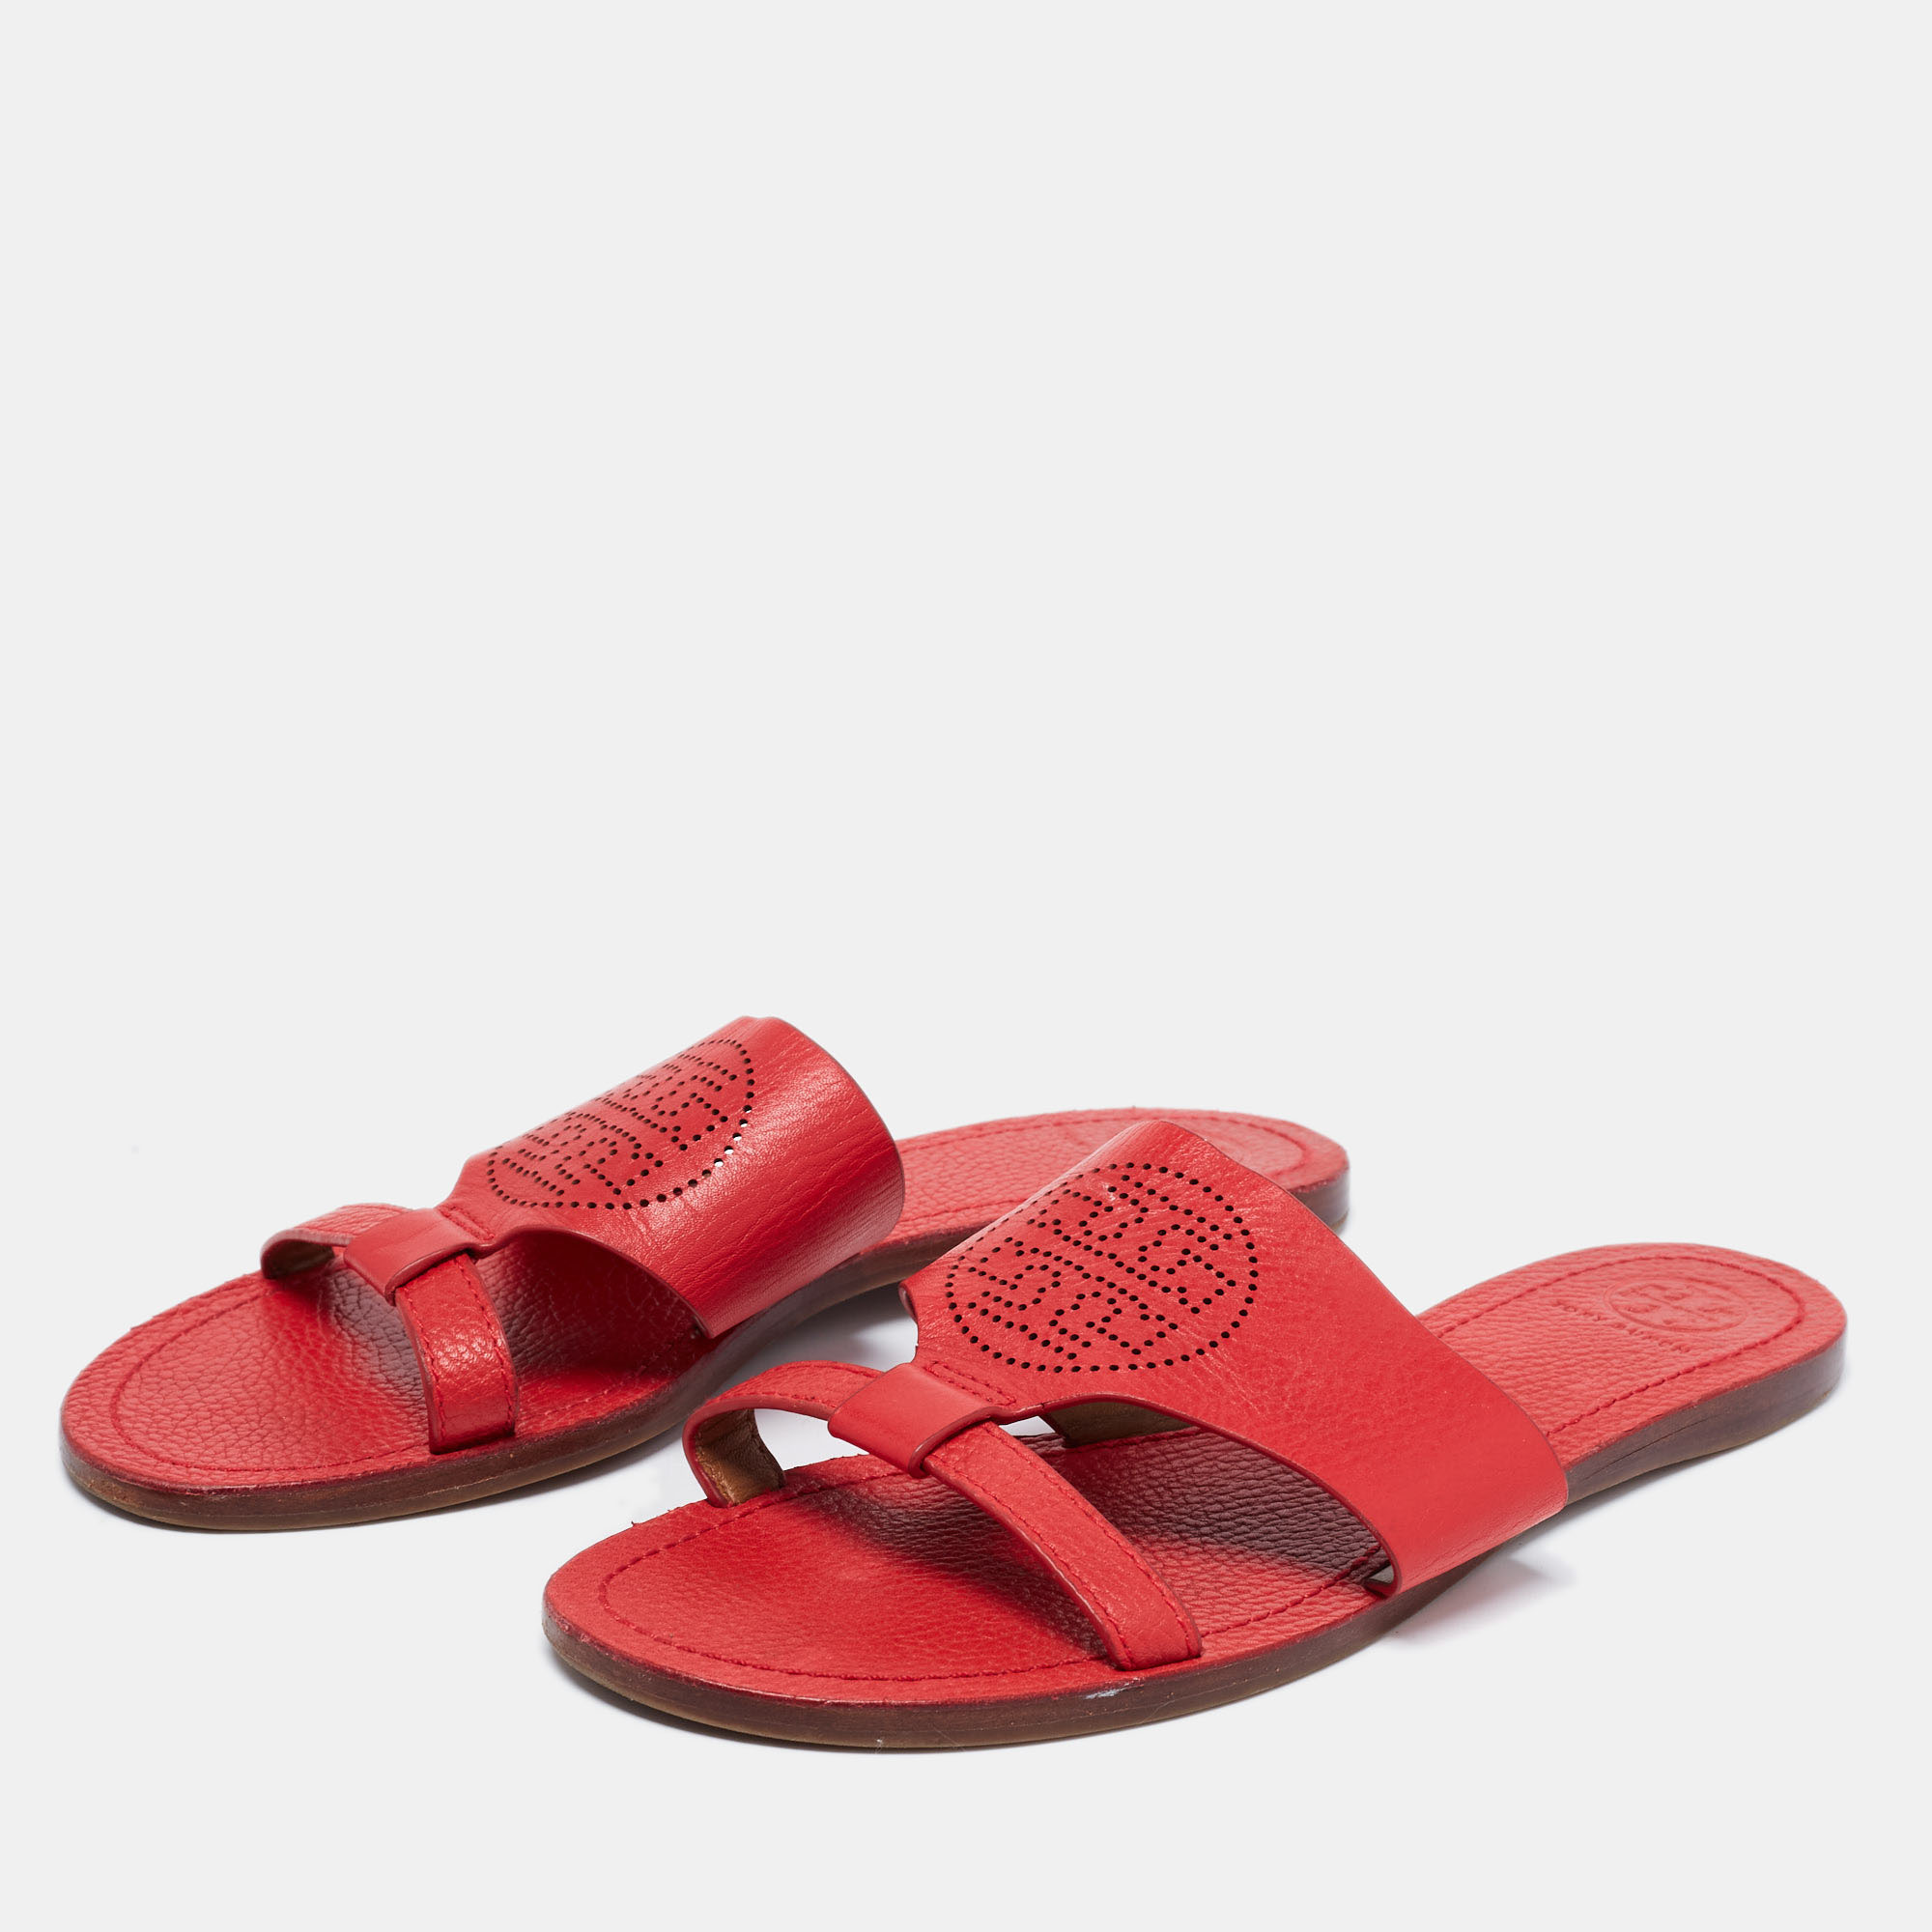 

Tory Burch Red Perforated Leather Flat Thong Slide Sandals Size